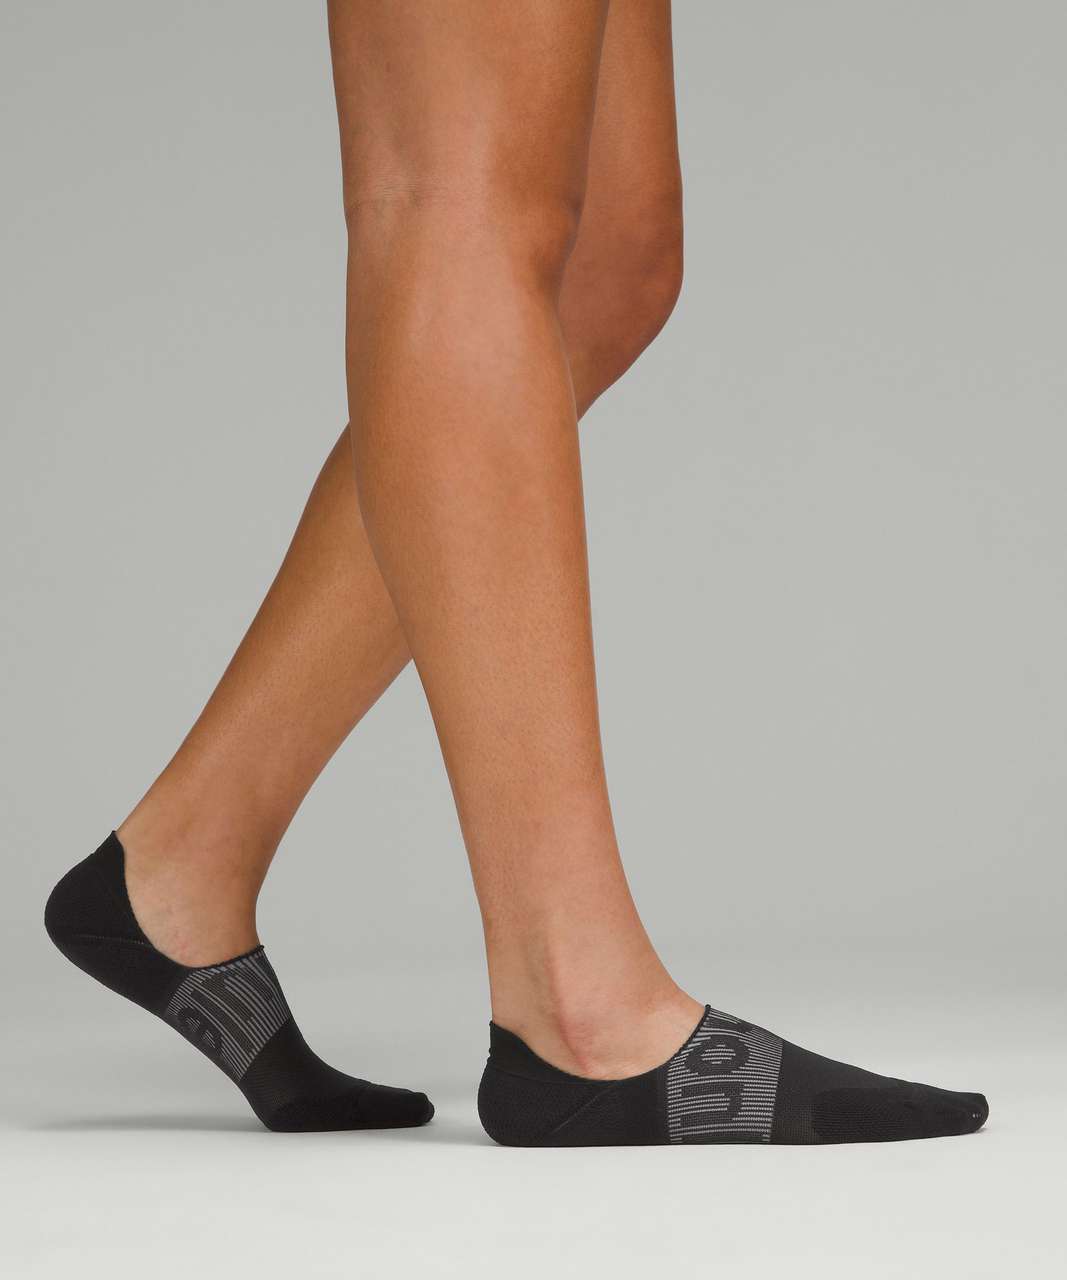 Lululemon Power Stride No-Show Sock with Active Grip 5 Pack - Black